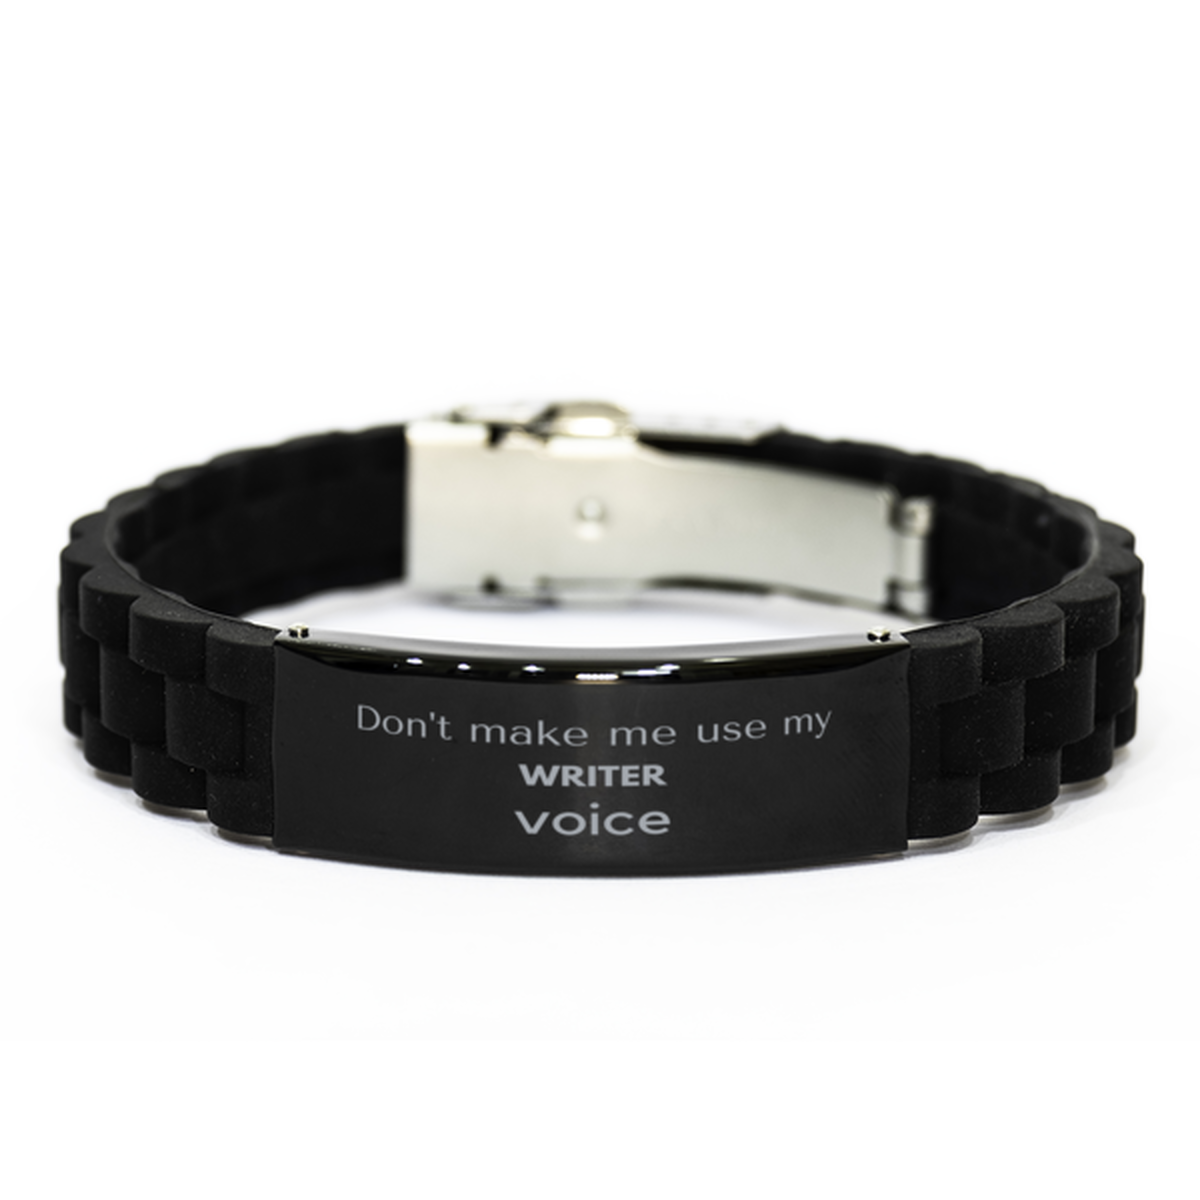 Don't make me use my Writer voice, Sarcasm Writer Gifts, Christmas Writer Black Glidelock Clasp Bracelet Birthday Unique Gifts For Writer Coworkers, Men, Women, Colleague, Friends